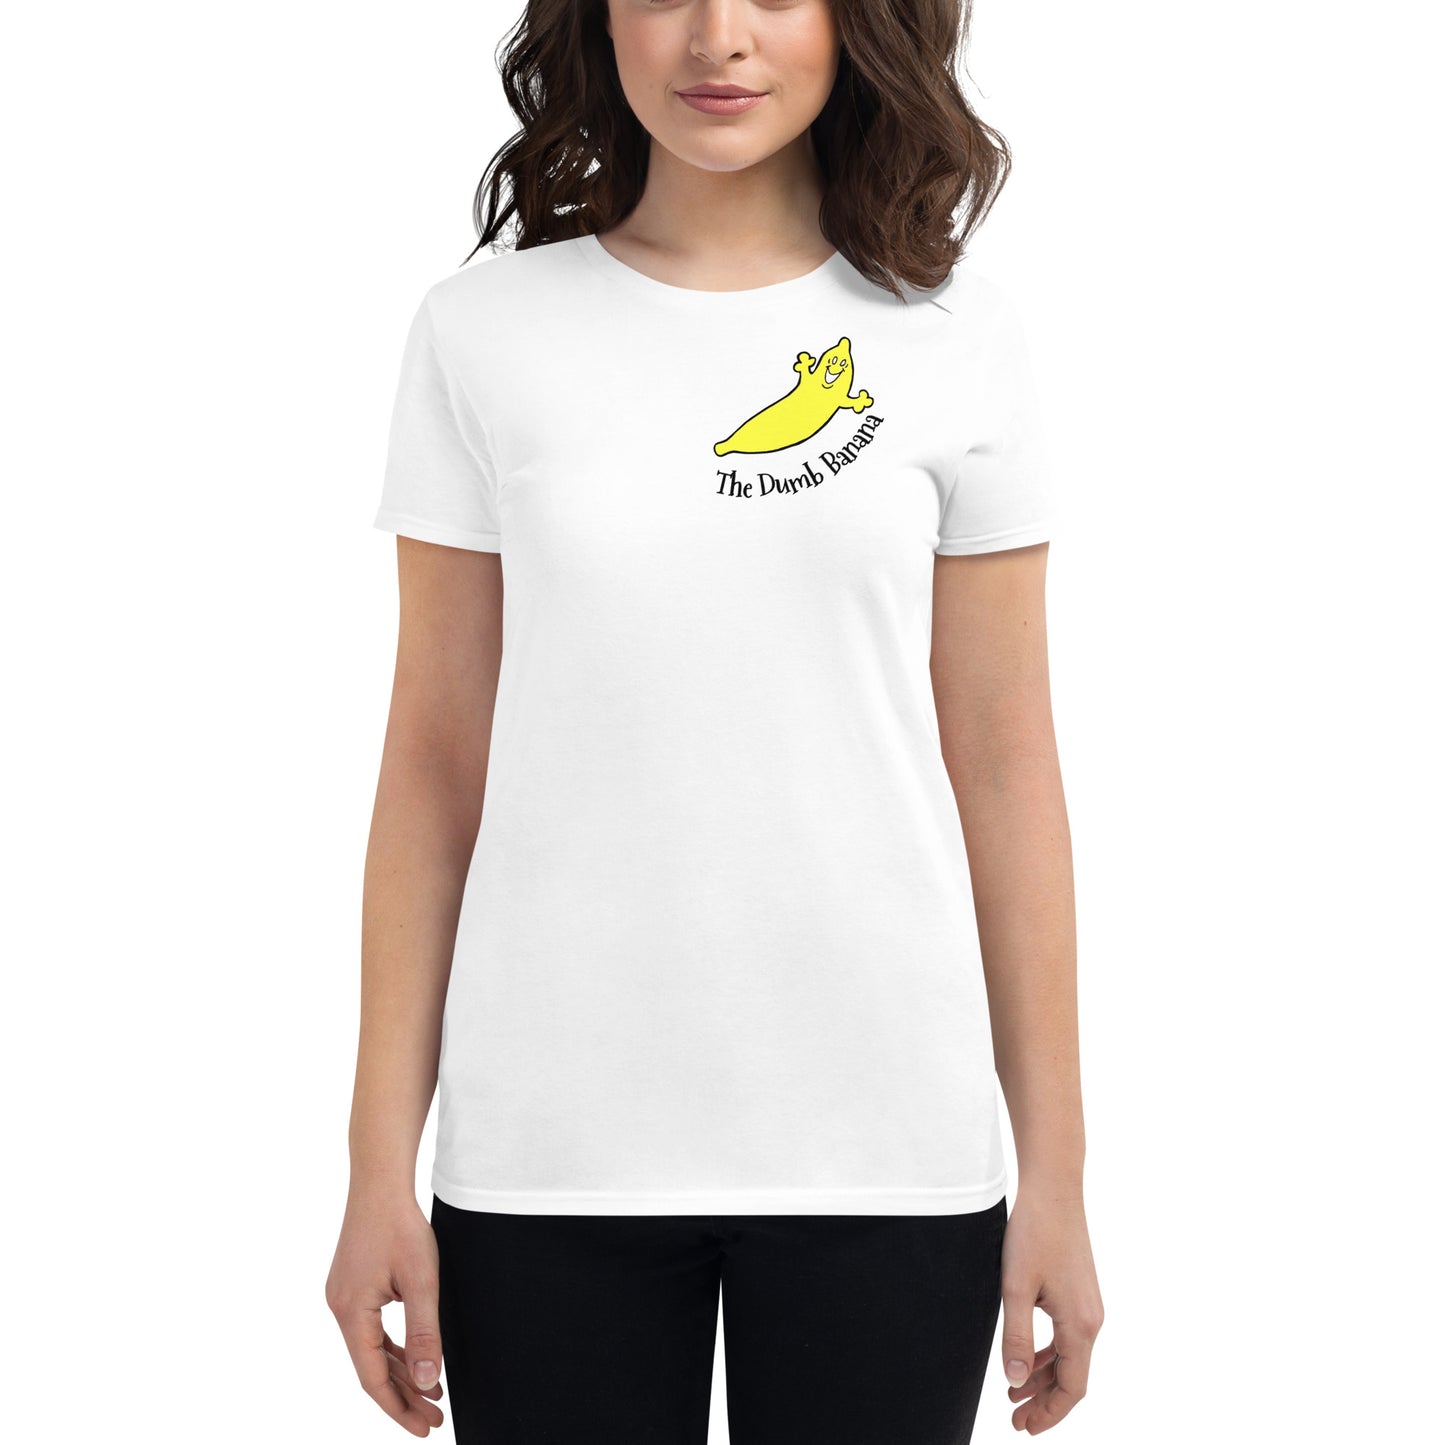 THE DUMB BANANA Women's Short Sleeve Fashion Fit T-Shirt - It's so glorious and divine!!!